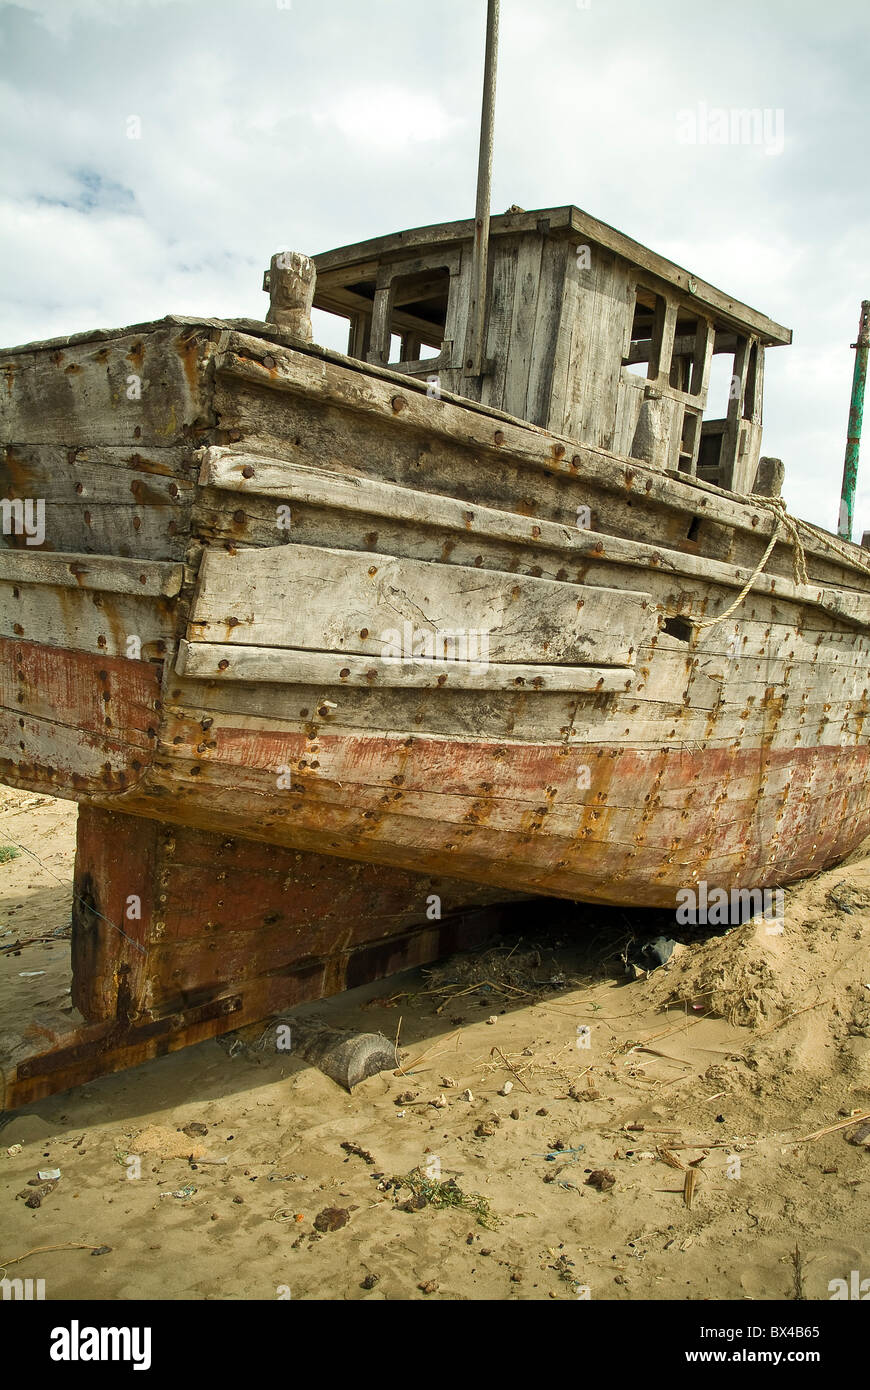 Abandoned fishing boat in a fishing village on the Island of Diu, India Stock Photo